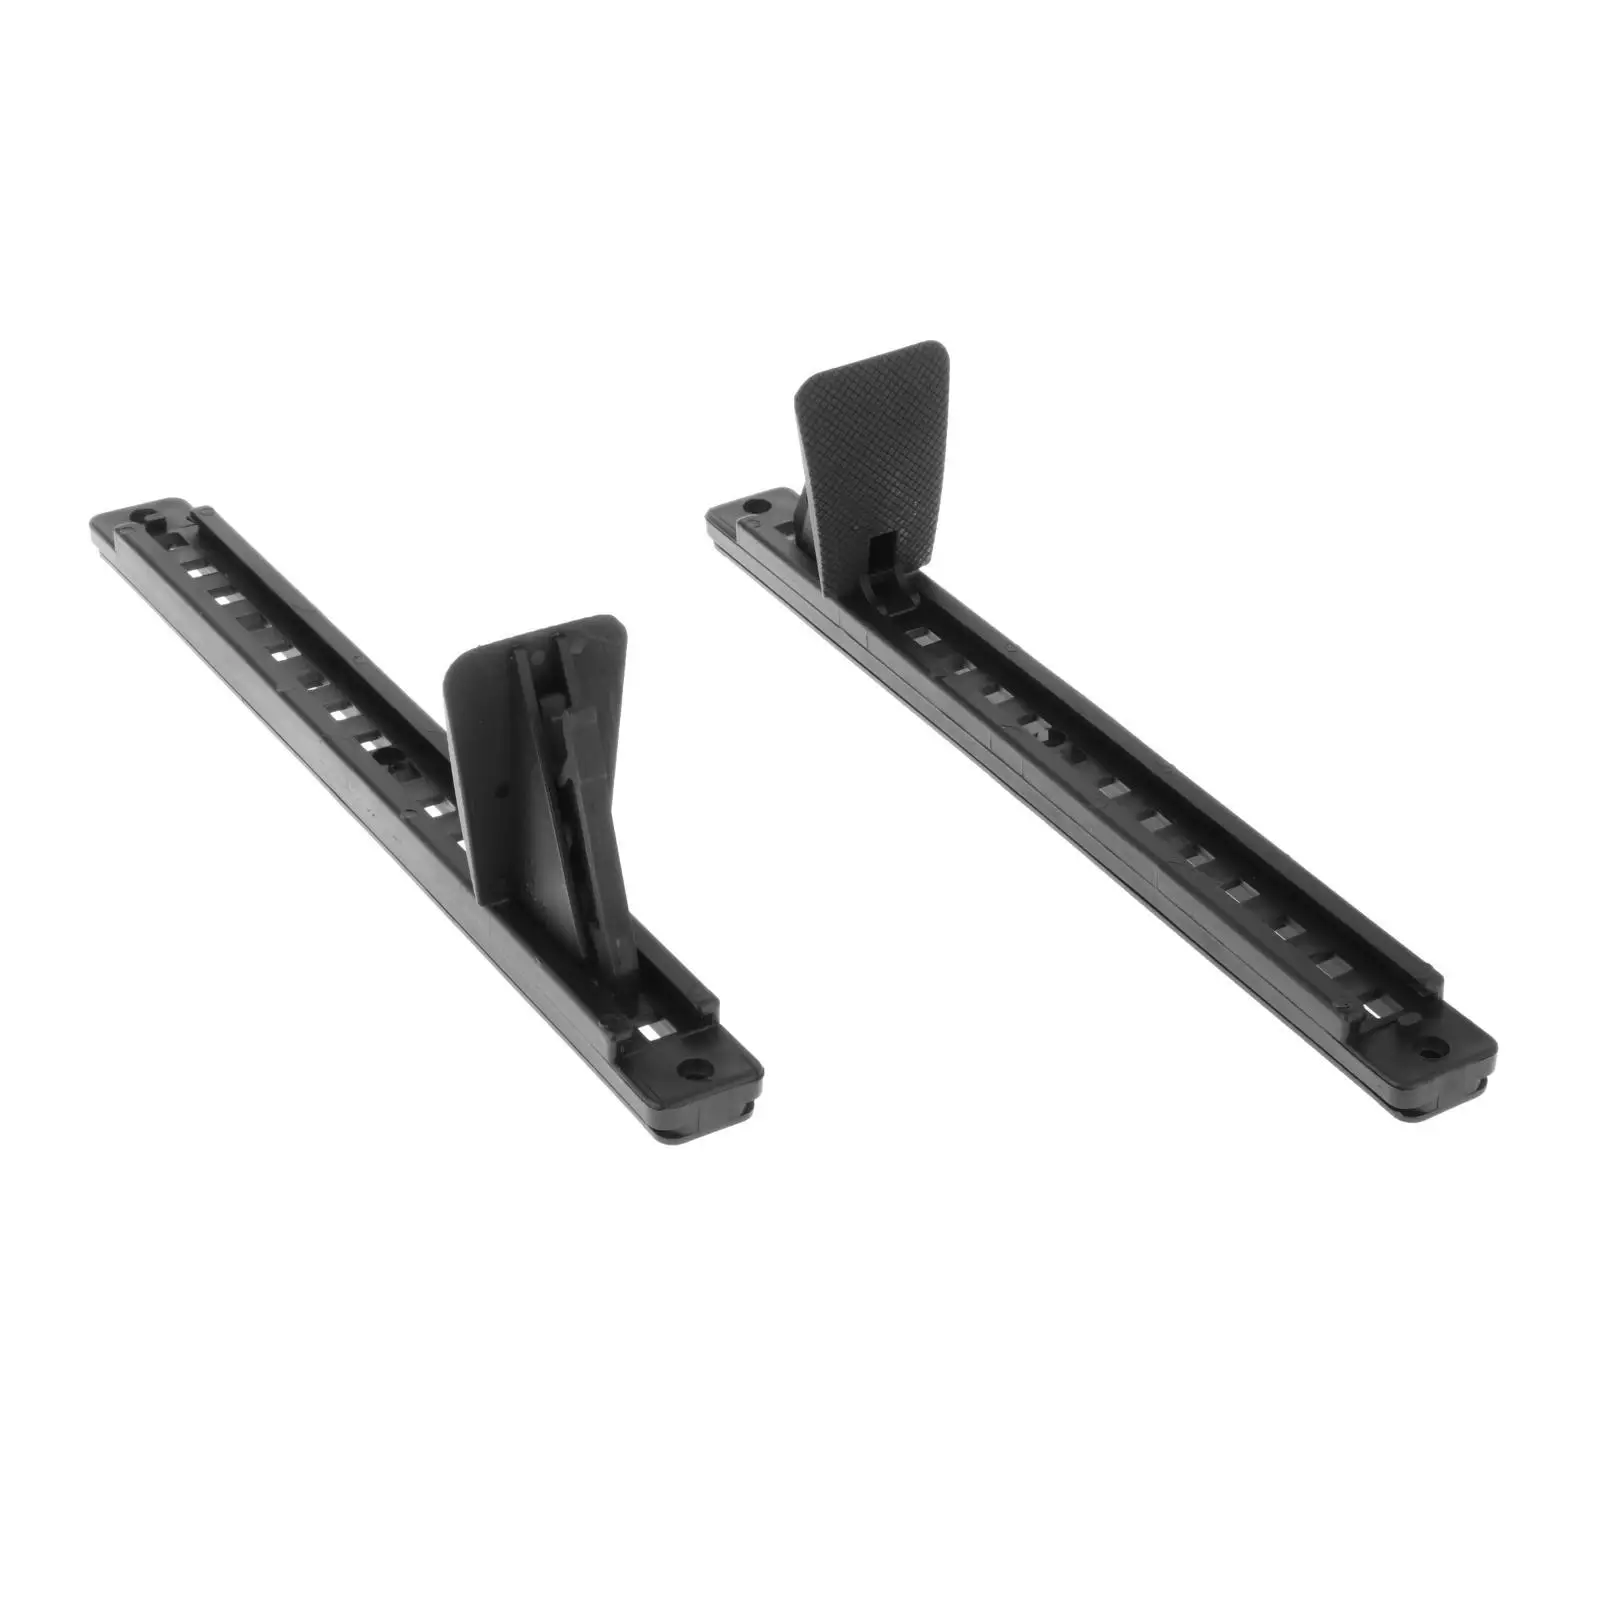 Kayak Foot Pegs Easy to Install Set of 2 Replacement Nylon with Lock 15 Inches Kayak Accessories Black Foot Rest Pedals